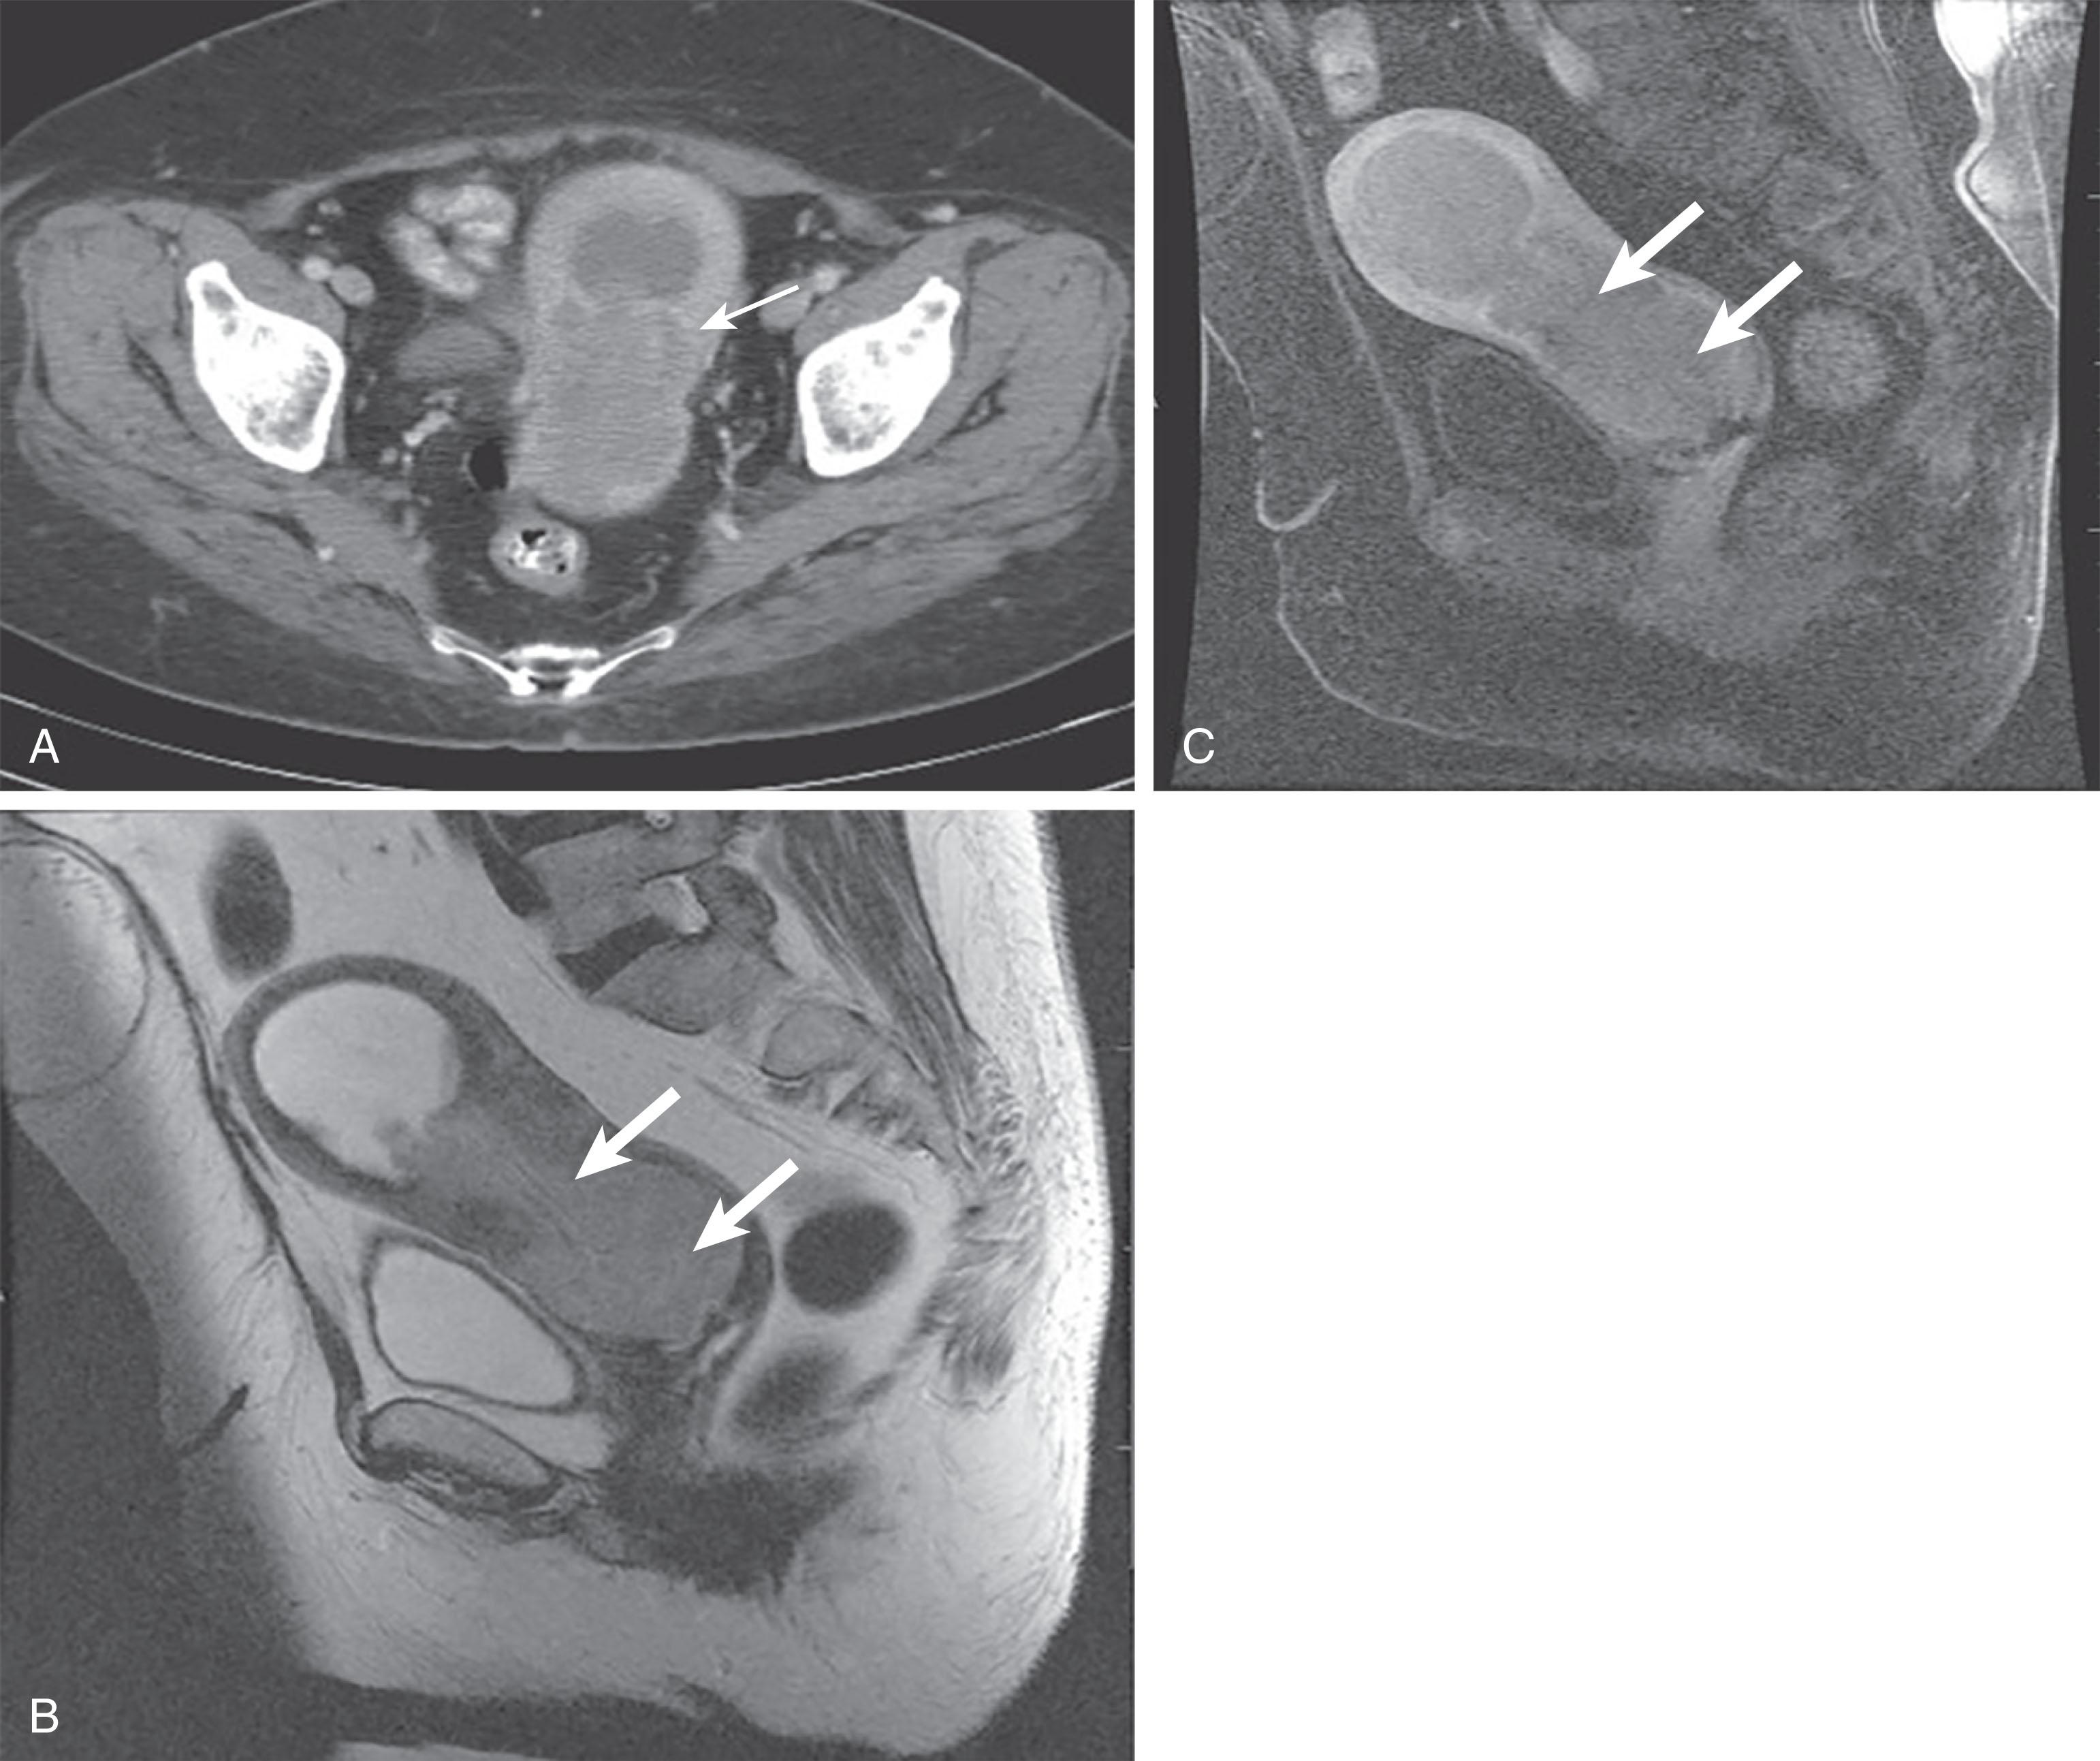 Figure 25.6, A 62-year-old woman with postmenopausal bleeding. A , Contrast-enhanced computed tomography scan demonstrates an intrauterine mass ( white arrow ) extending from the uterine body segment to involve the cervix. B , Sagittal T2-weighted magnetic resonance imaging (MRI) study demonstrates the intrauterine mass extending from the mid uterine body to the cervix ( white arrows ). C , Sagittal fat-suppressed postcontrast MRI of the pelvis demonstrates the relative hypoenhancement of the tumor ( white arrows ) as compared with the adjacent myometrium.